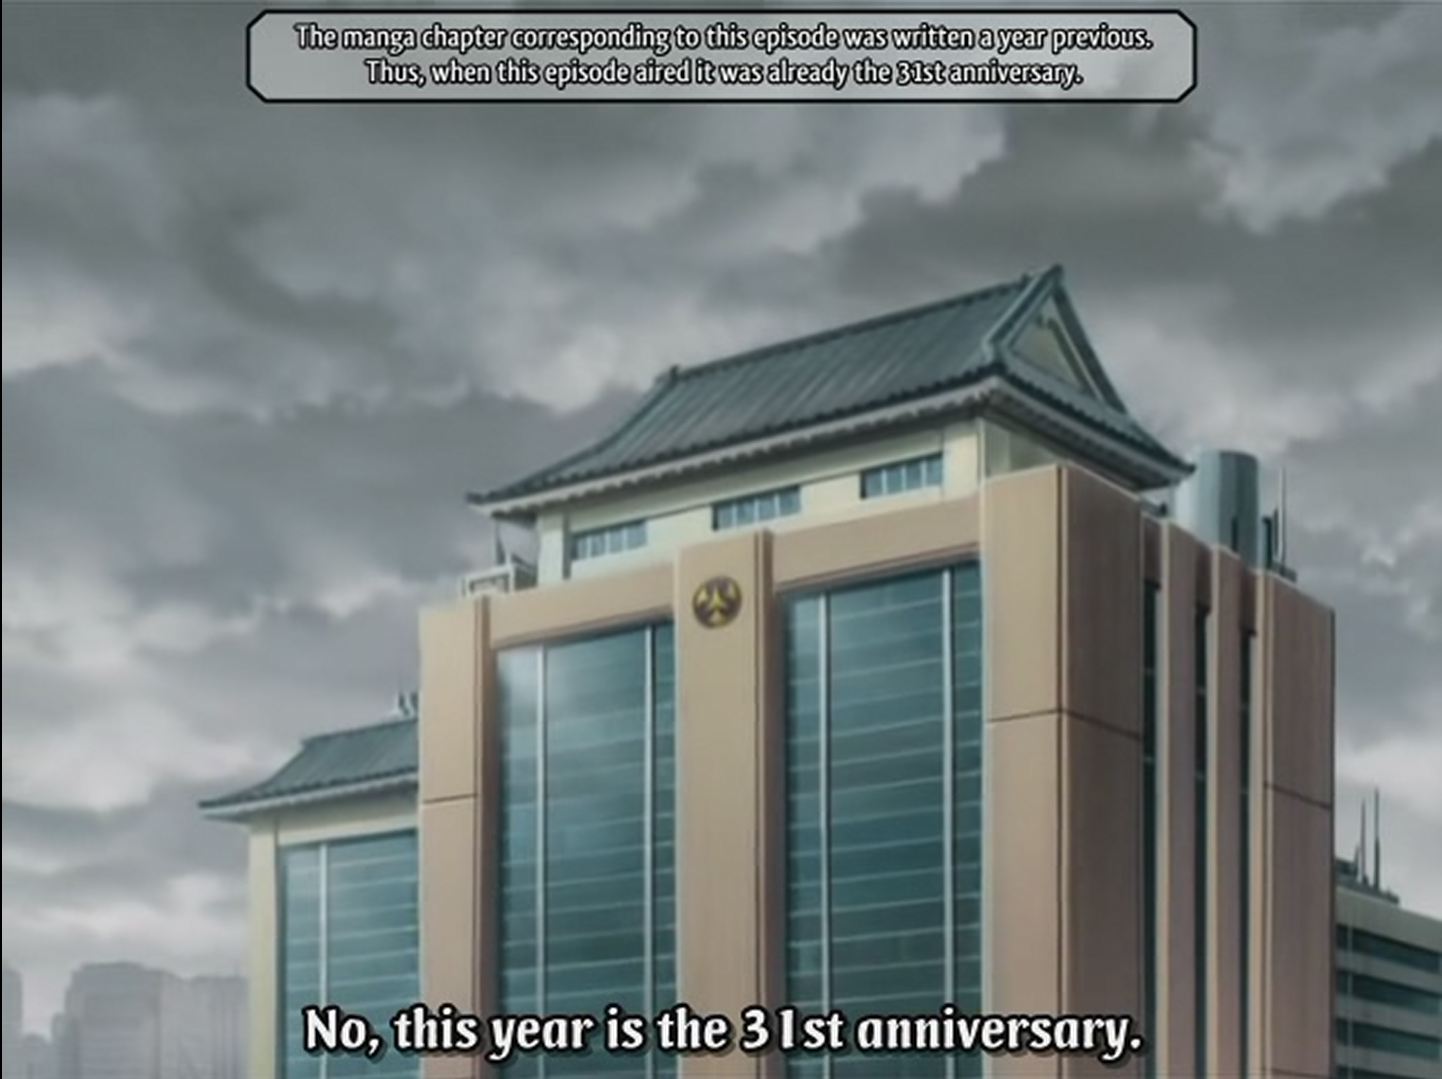 Screen cap of exterior of building. Supertitle: 'The manga chapter corresponding to this episode was written a year previous. Thus, when this episode aired it was already the 31st anniversary.' Subtitle: 'No, this year is the 31st anniversary.'